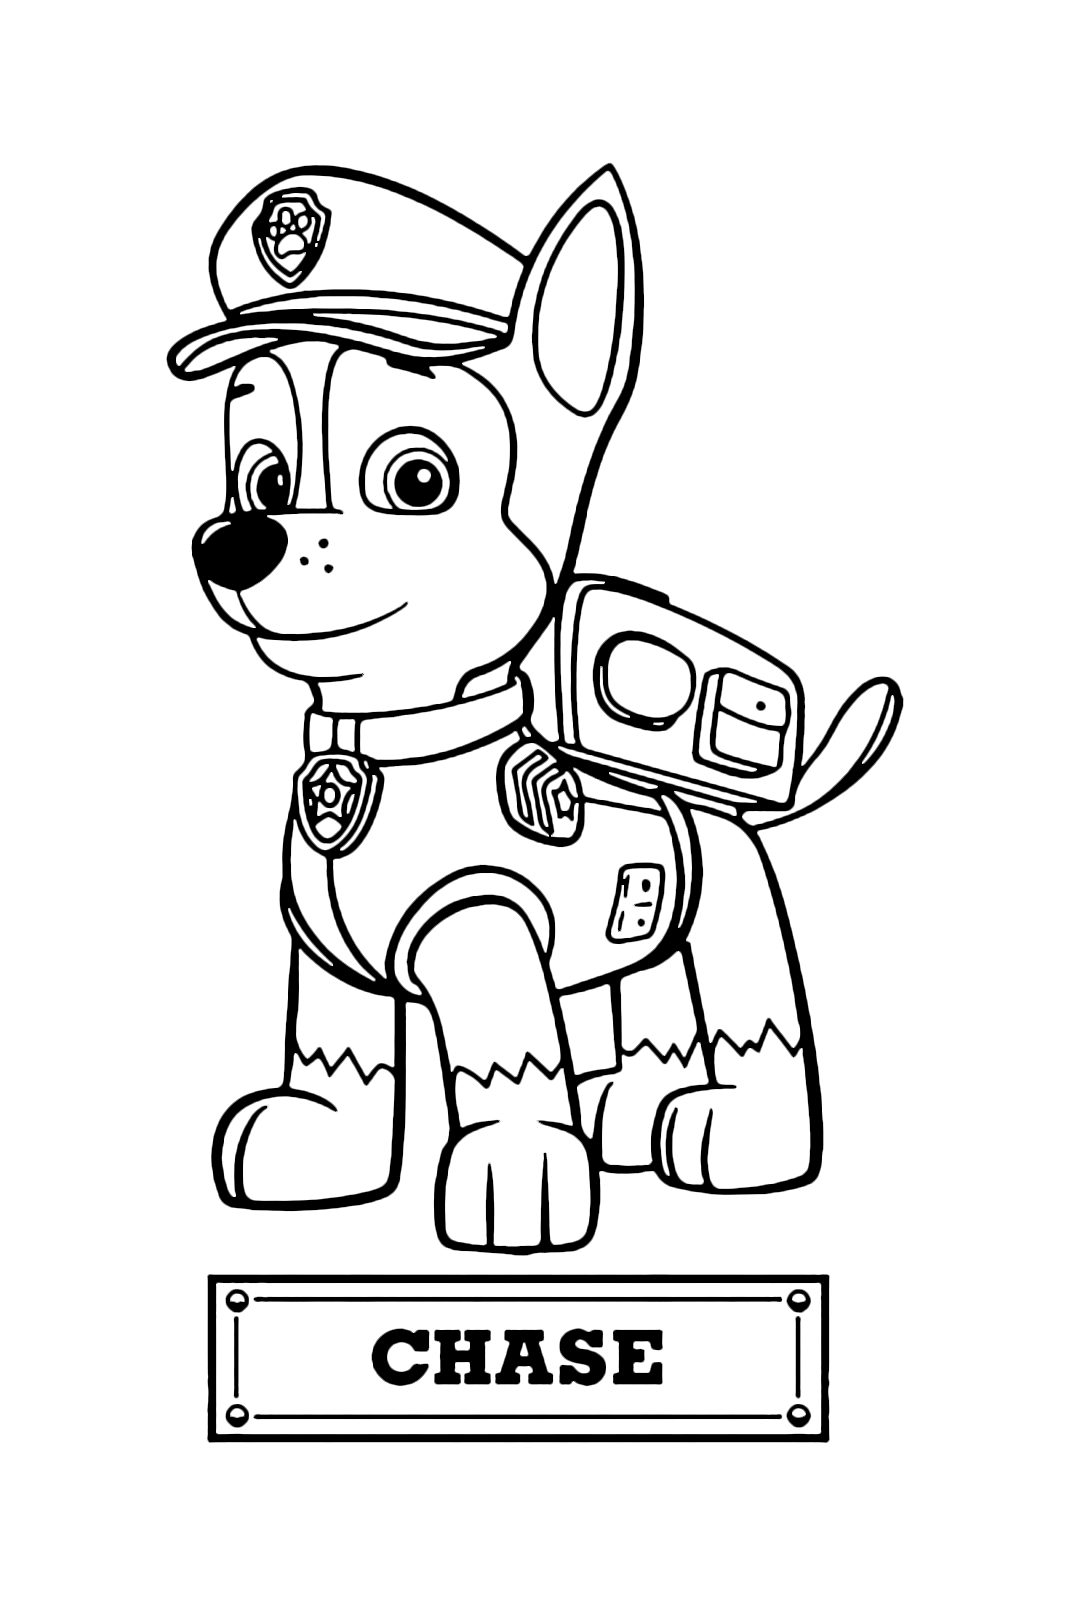 PAW Patrol   Chase the police dog